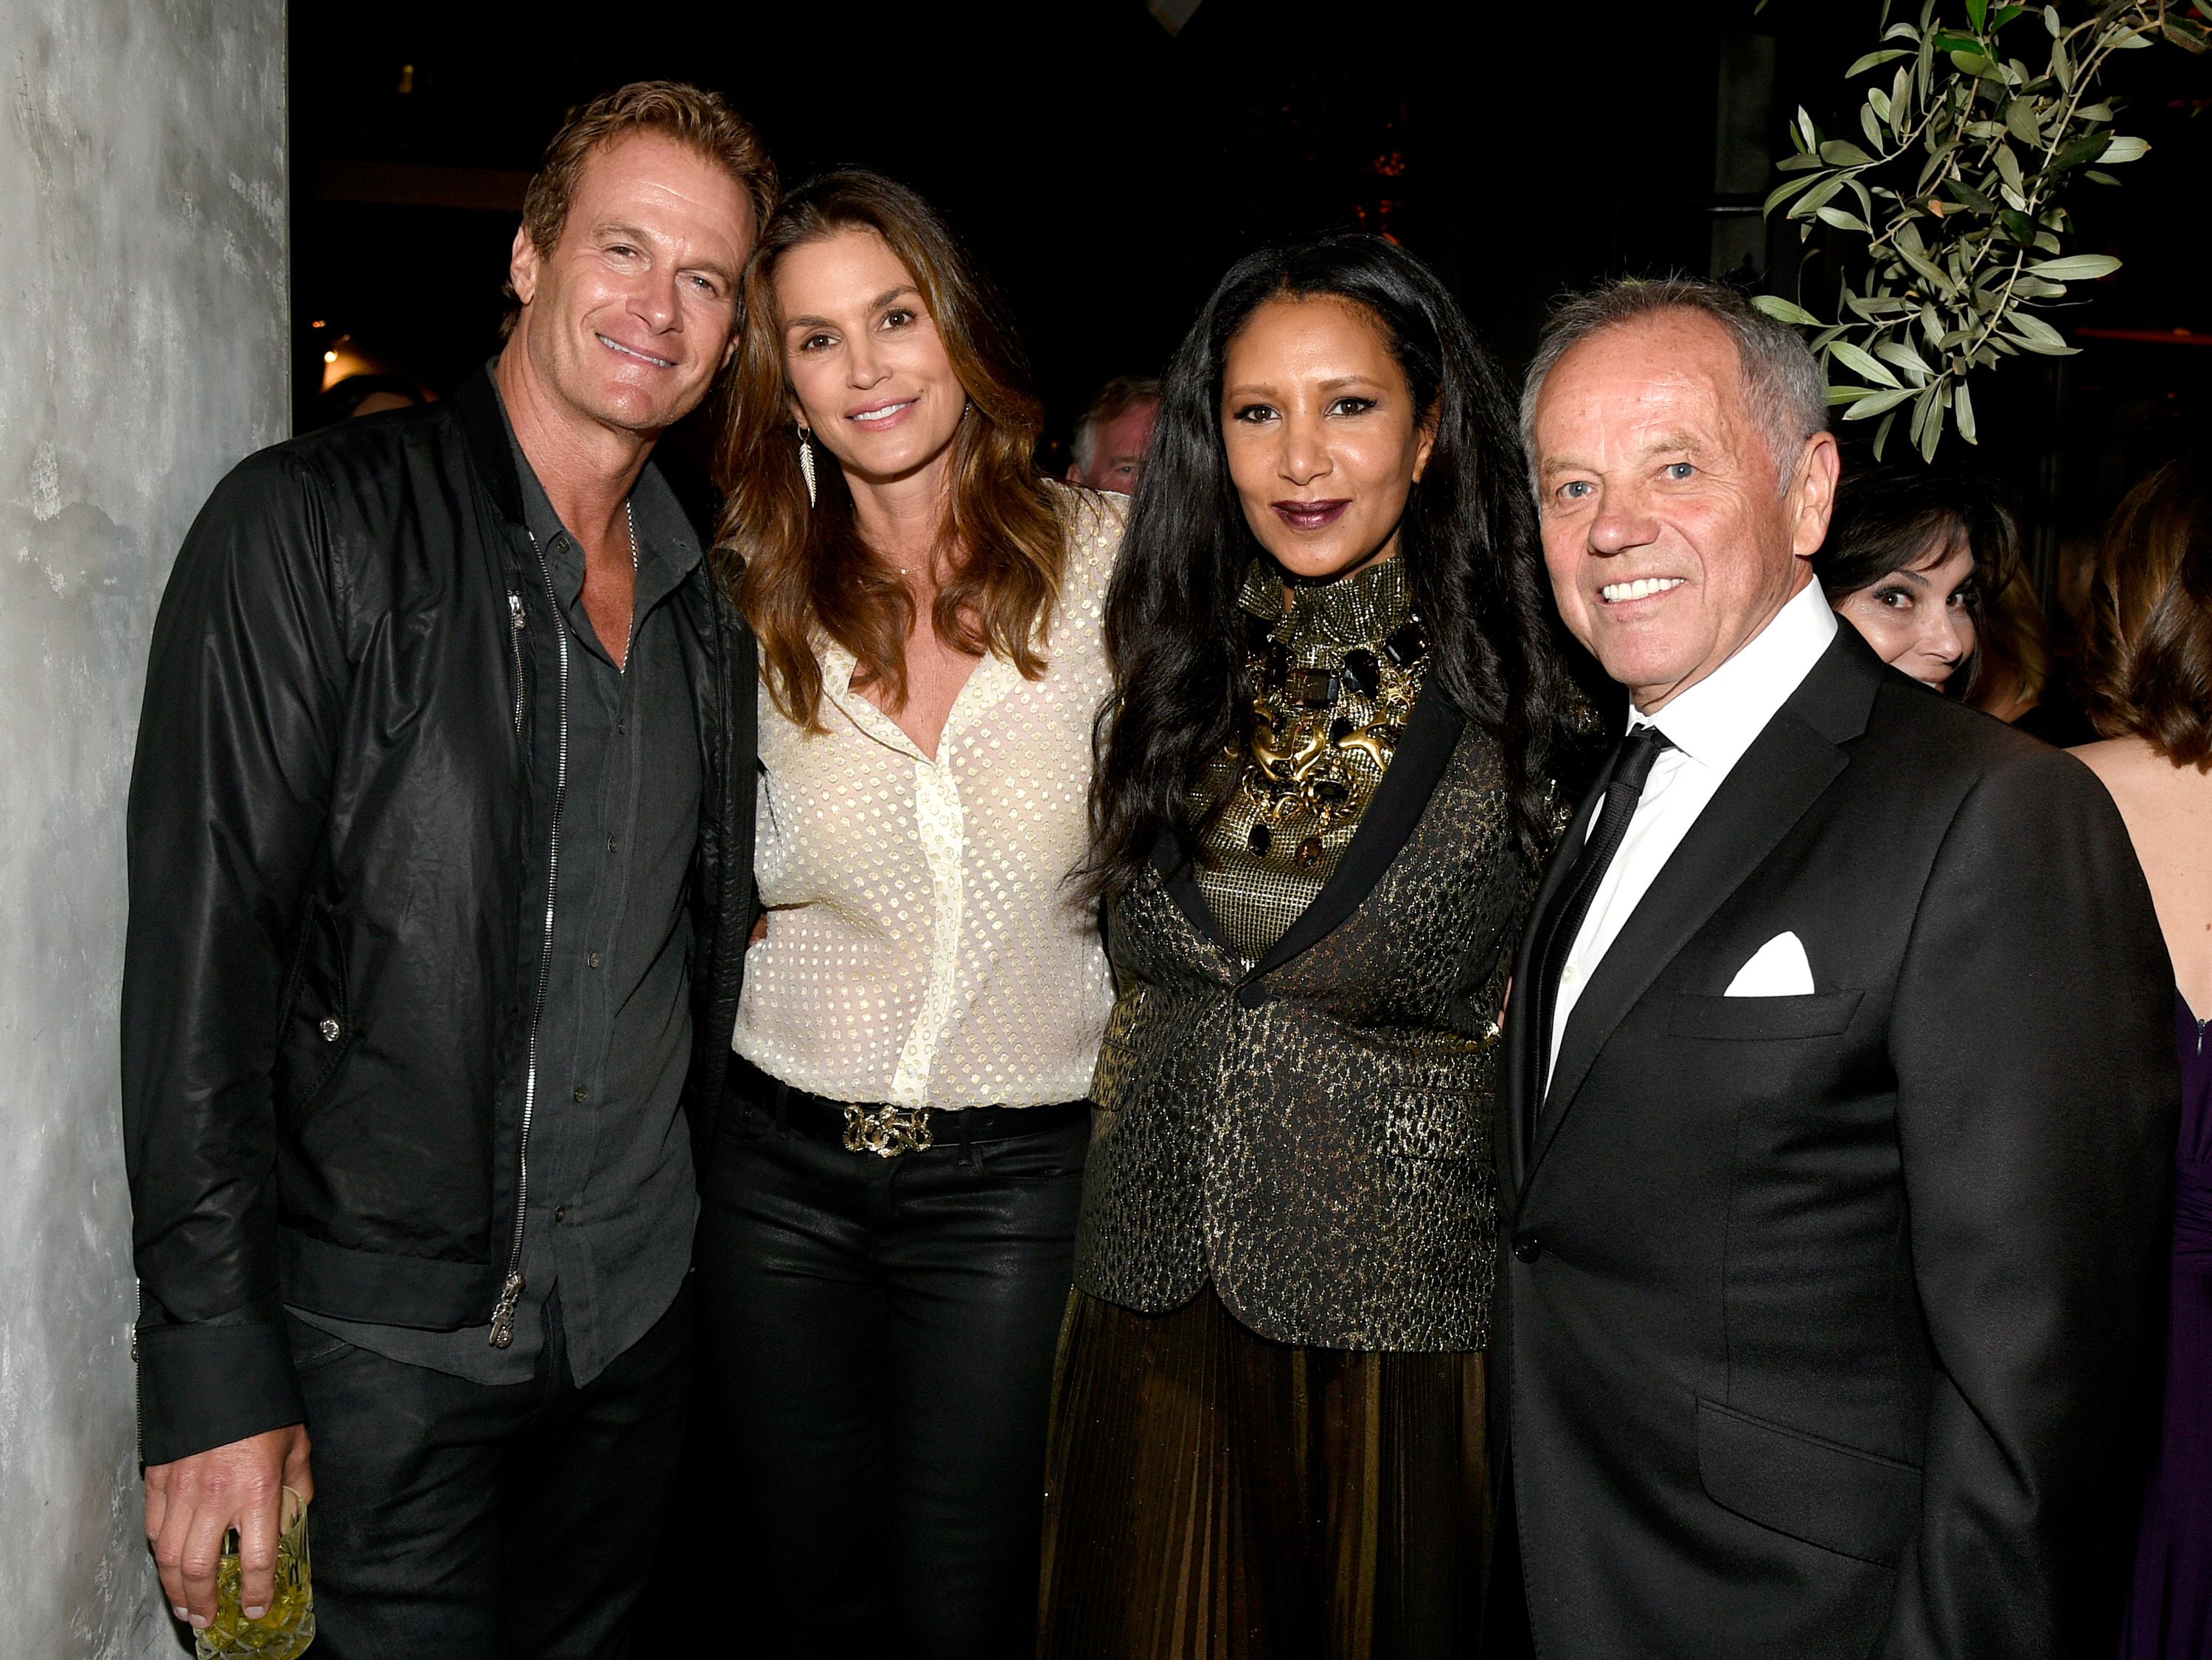 Cindy Crawford attends Wolfgang Puck Hollywood Walk of Fame party